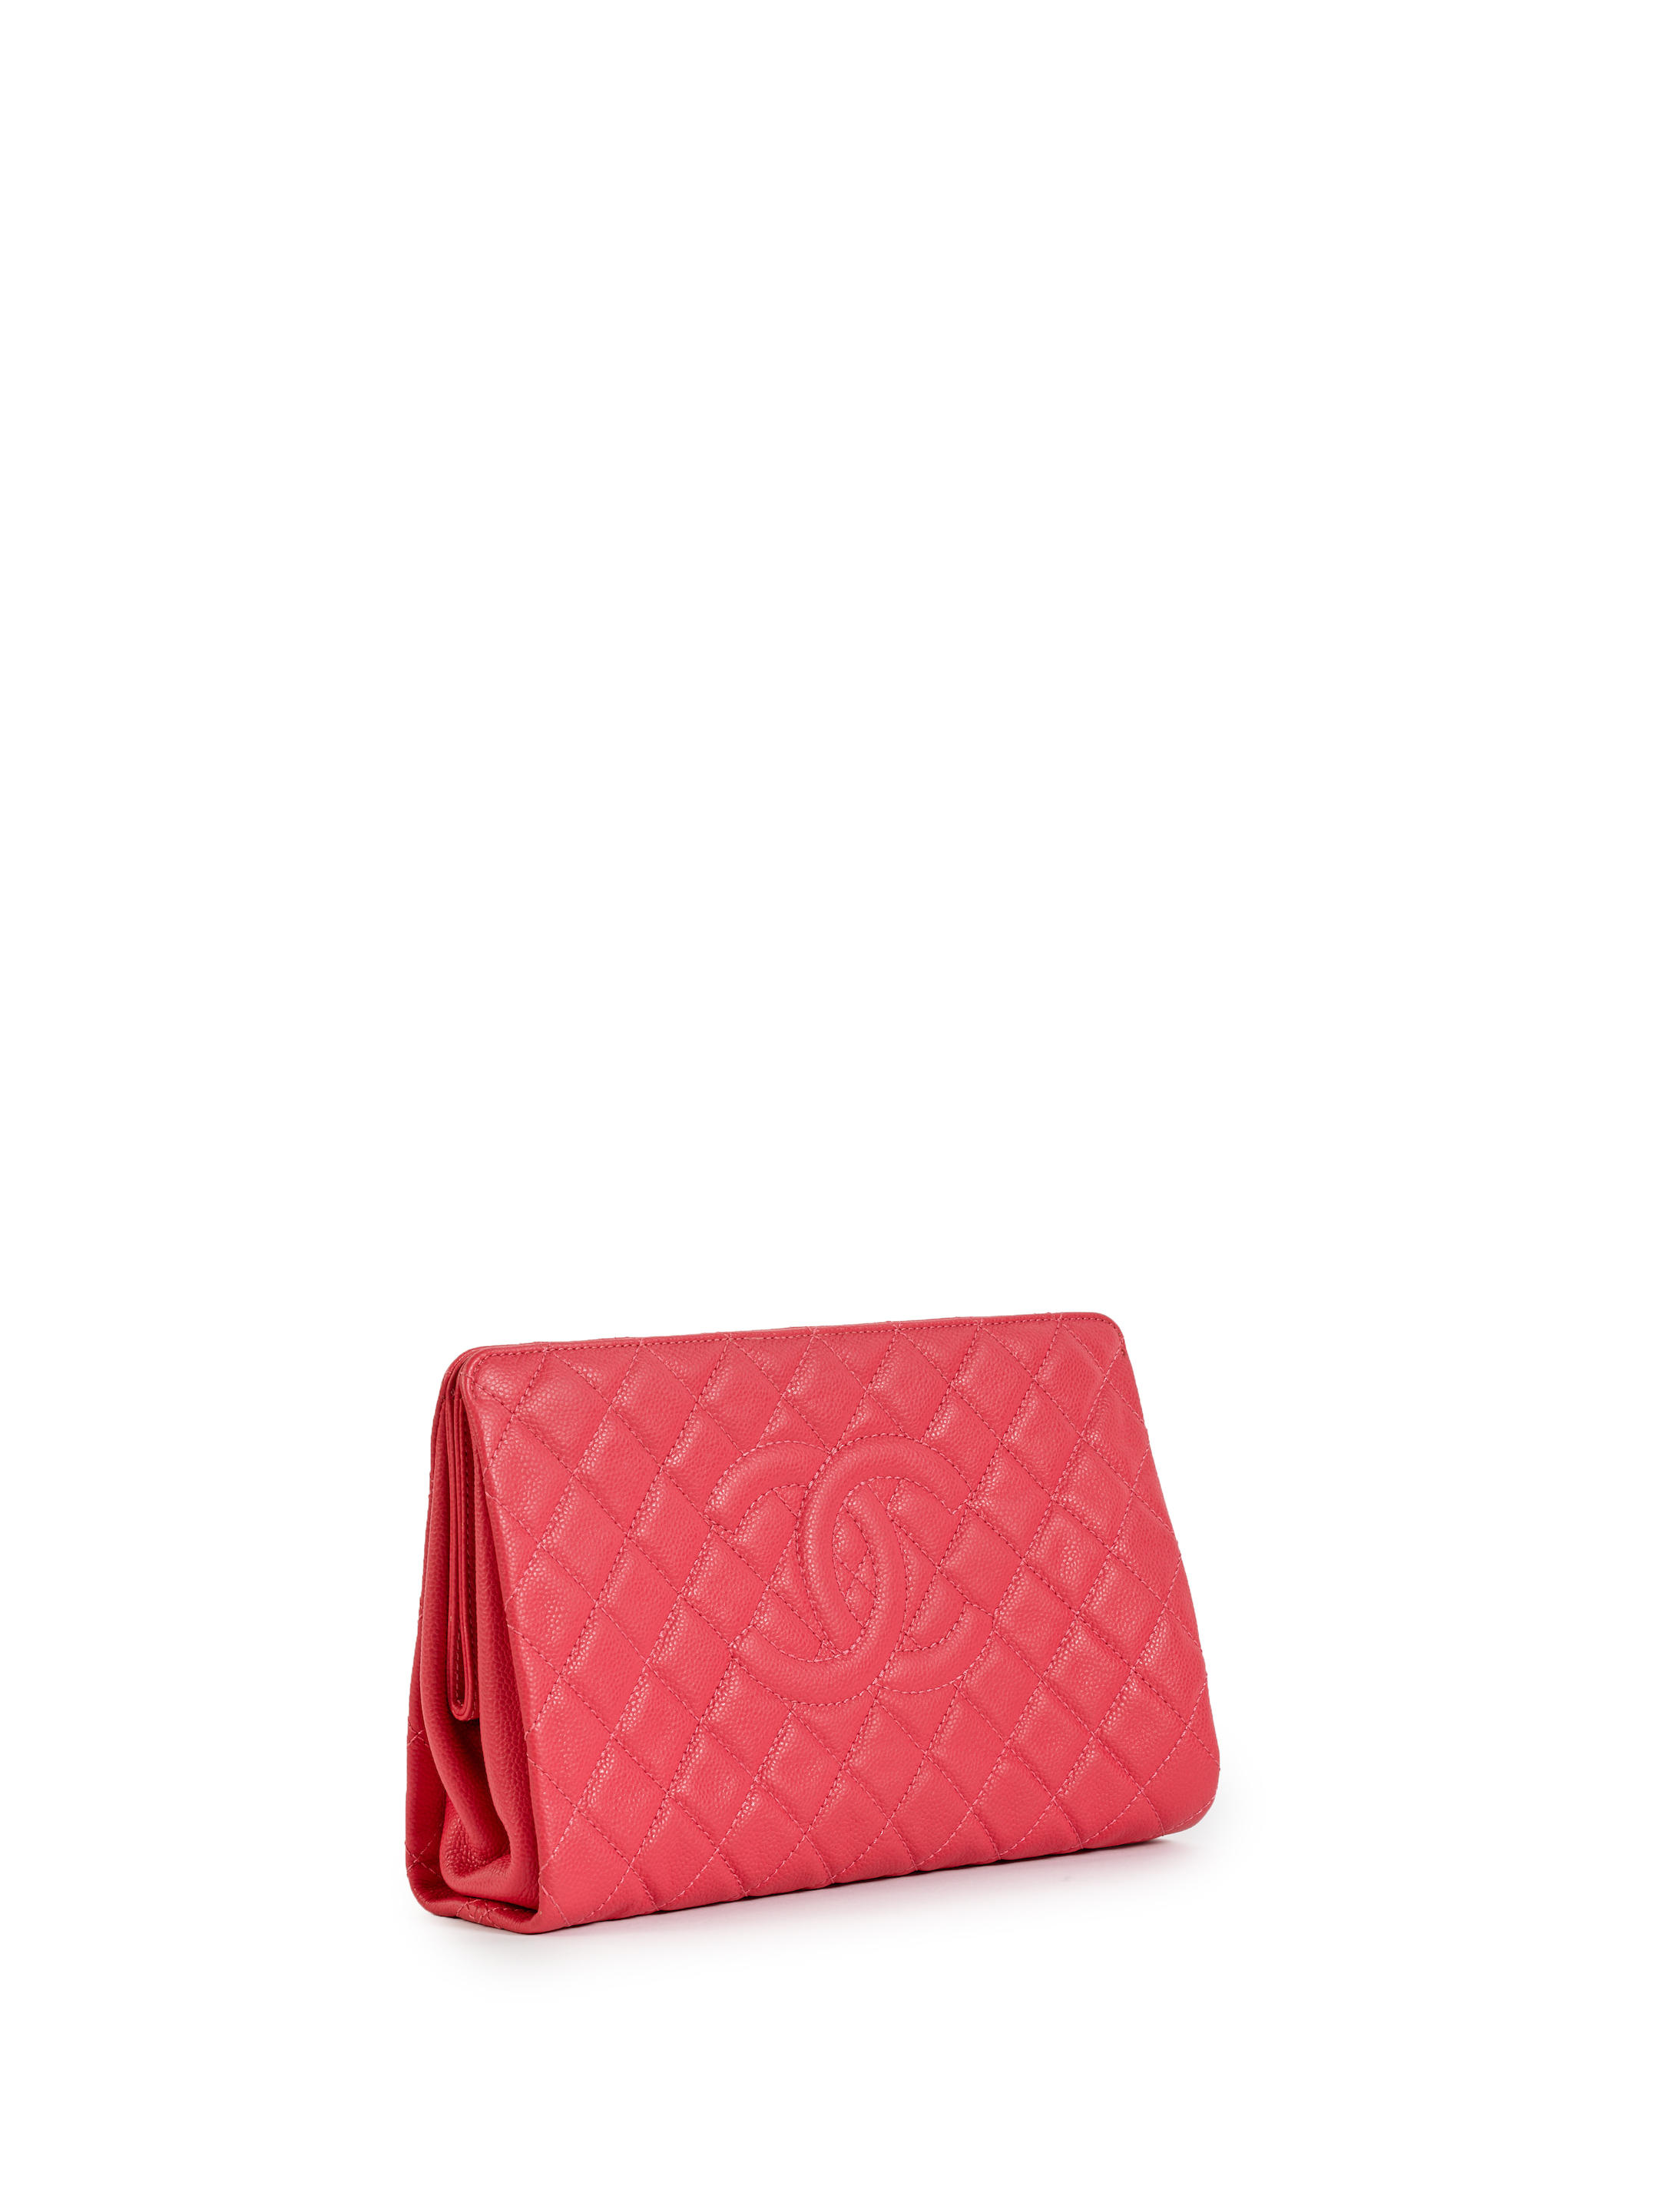 CHANEL ROSE RED QUILTED CAVIAR LEATHER CC LOGO LARGE TIMELESS CLUTCH  (includes serial sticker, authenticity card, original dust bag) - Bonhams